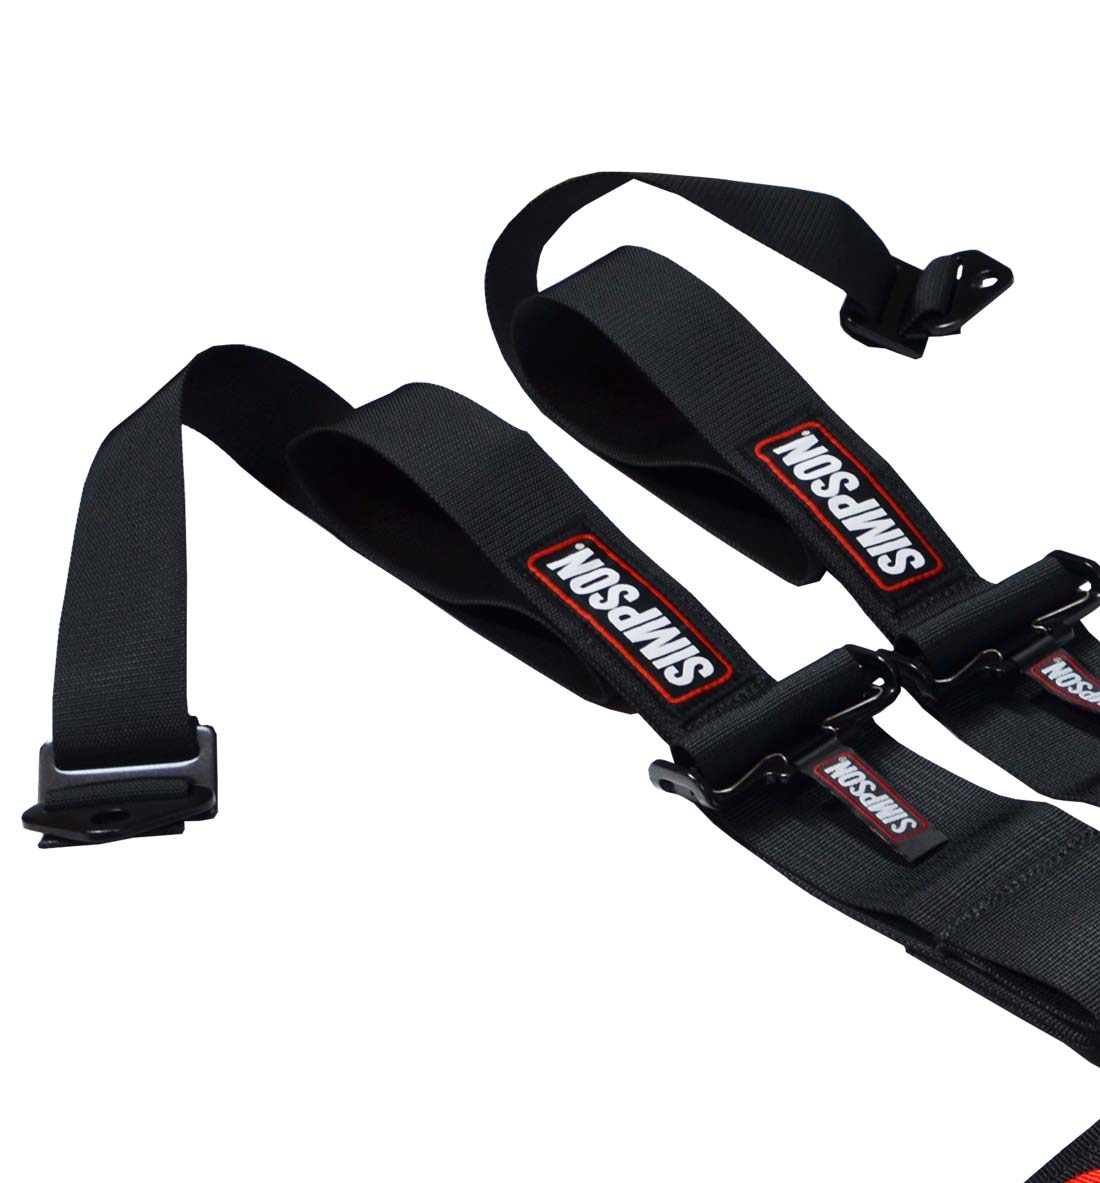 Simpson Racing 3" to 2" Latch & Link System FHR Race Harness - Black